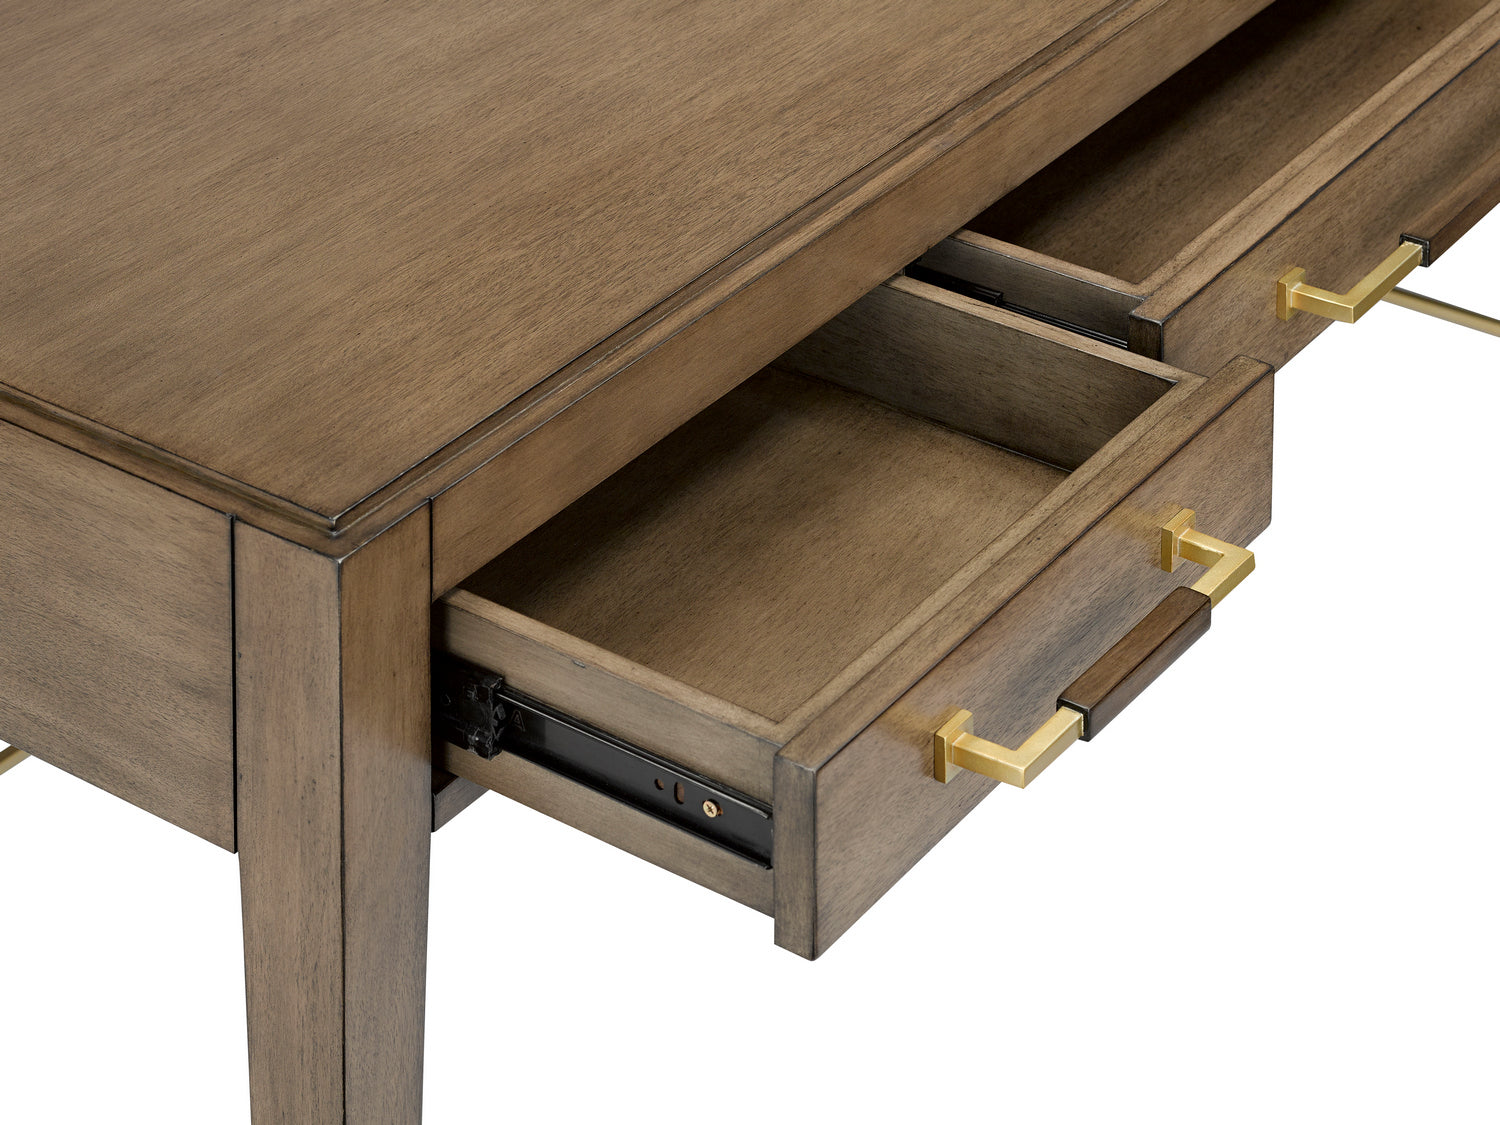 Desk from the Verona collection in Chanterelle/Coffee/Champagne finish